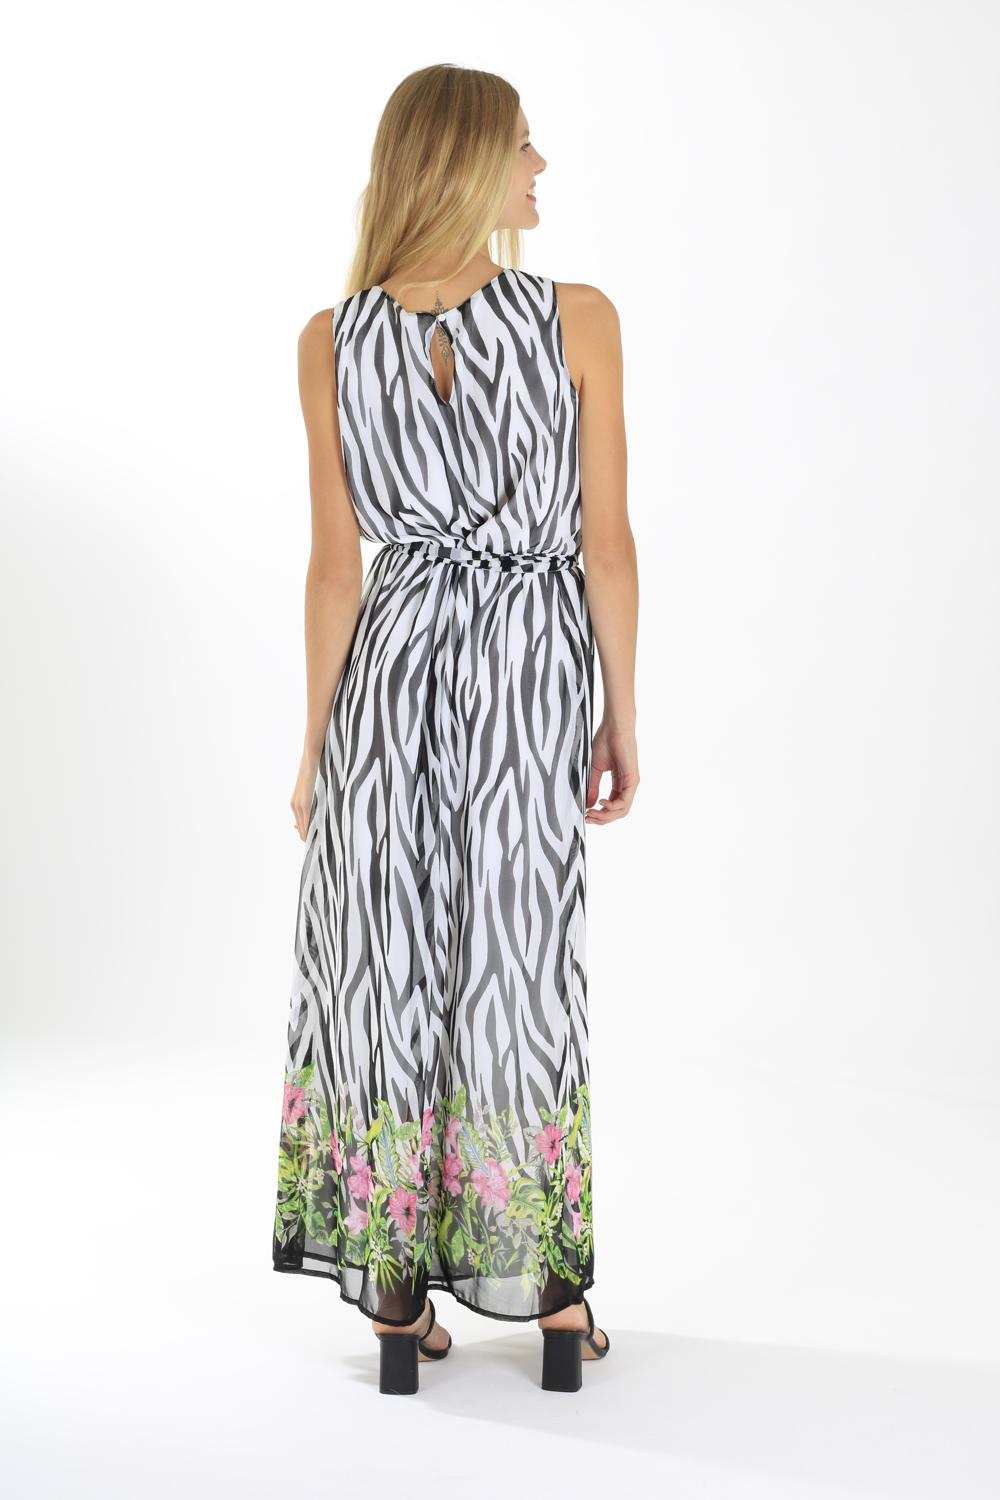 WRAP IT UP MAXI DRESS IN FLORAL PRINT